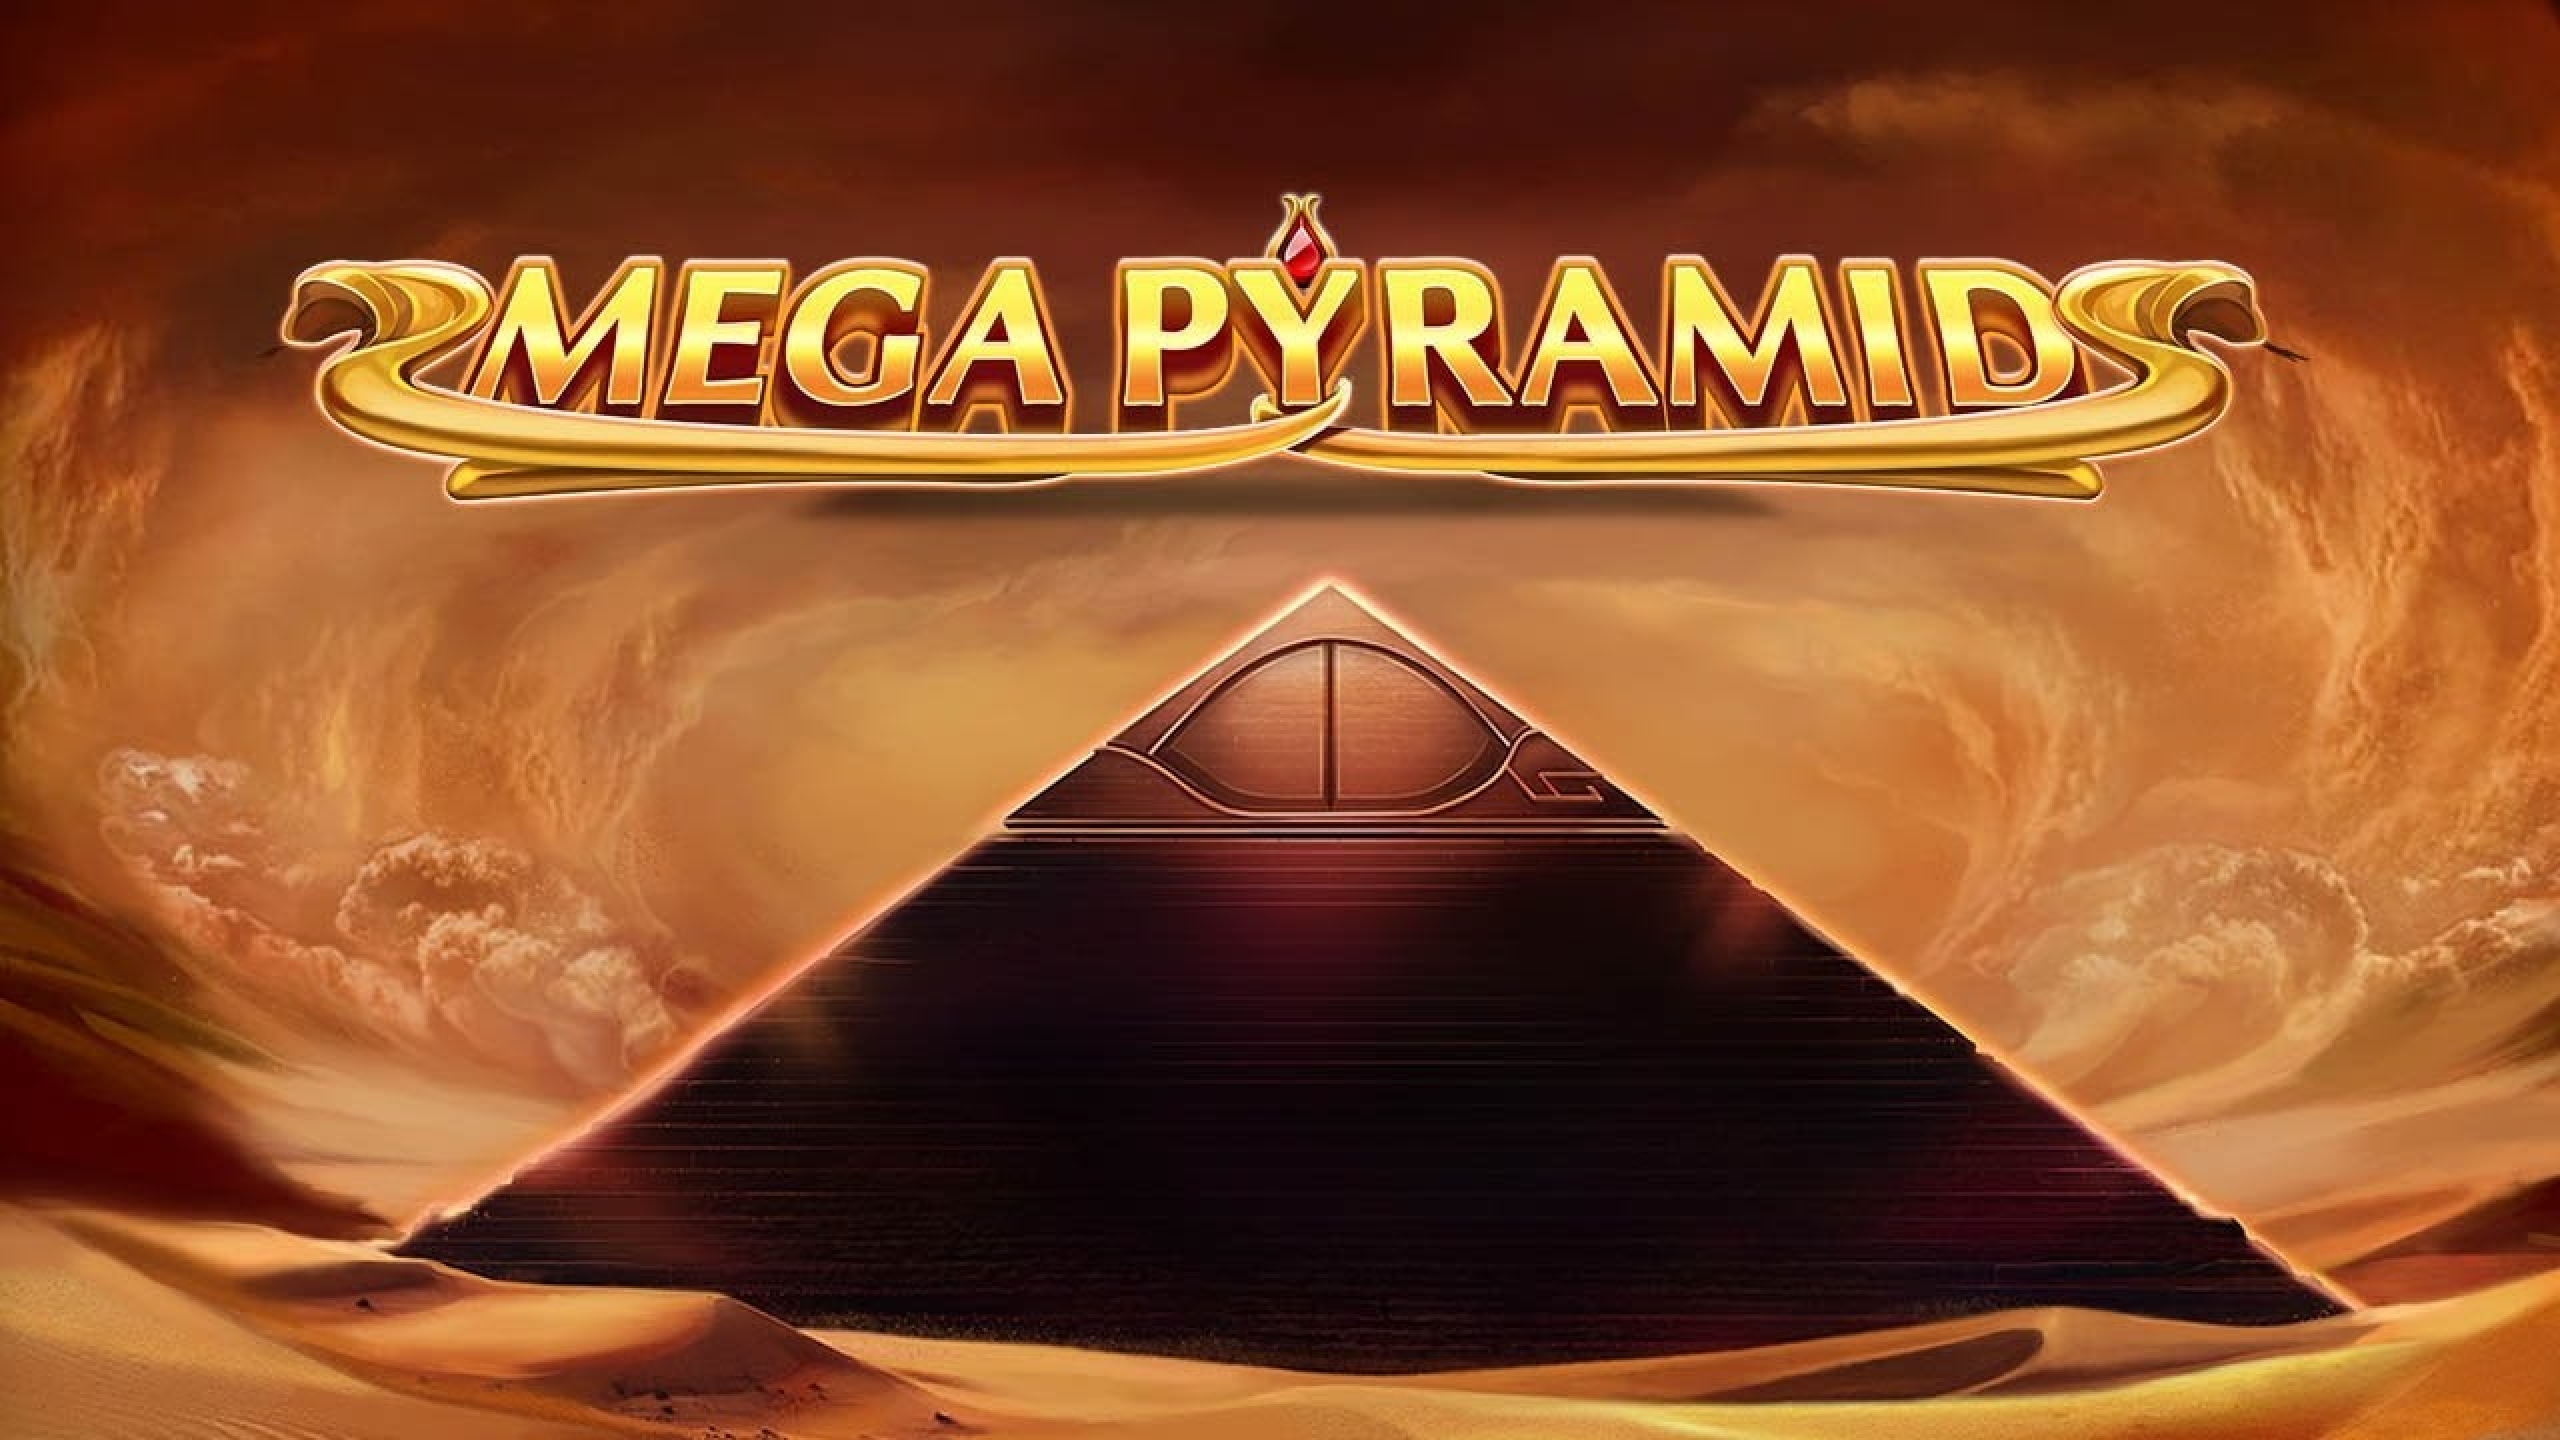 The Mega Pyramid Online Slot Demo Game by Red Tiger Gaming